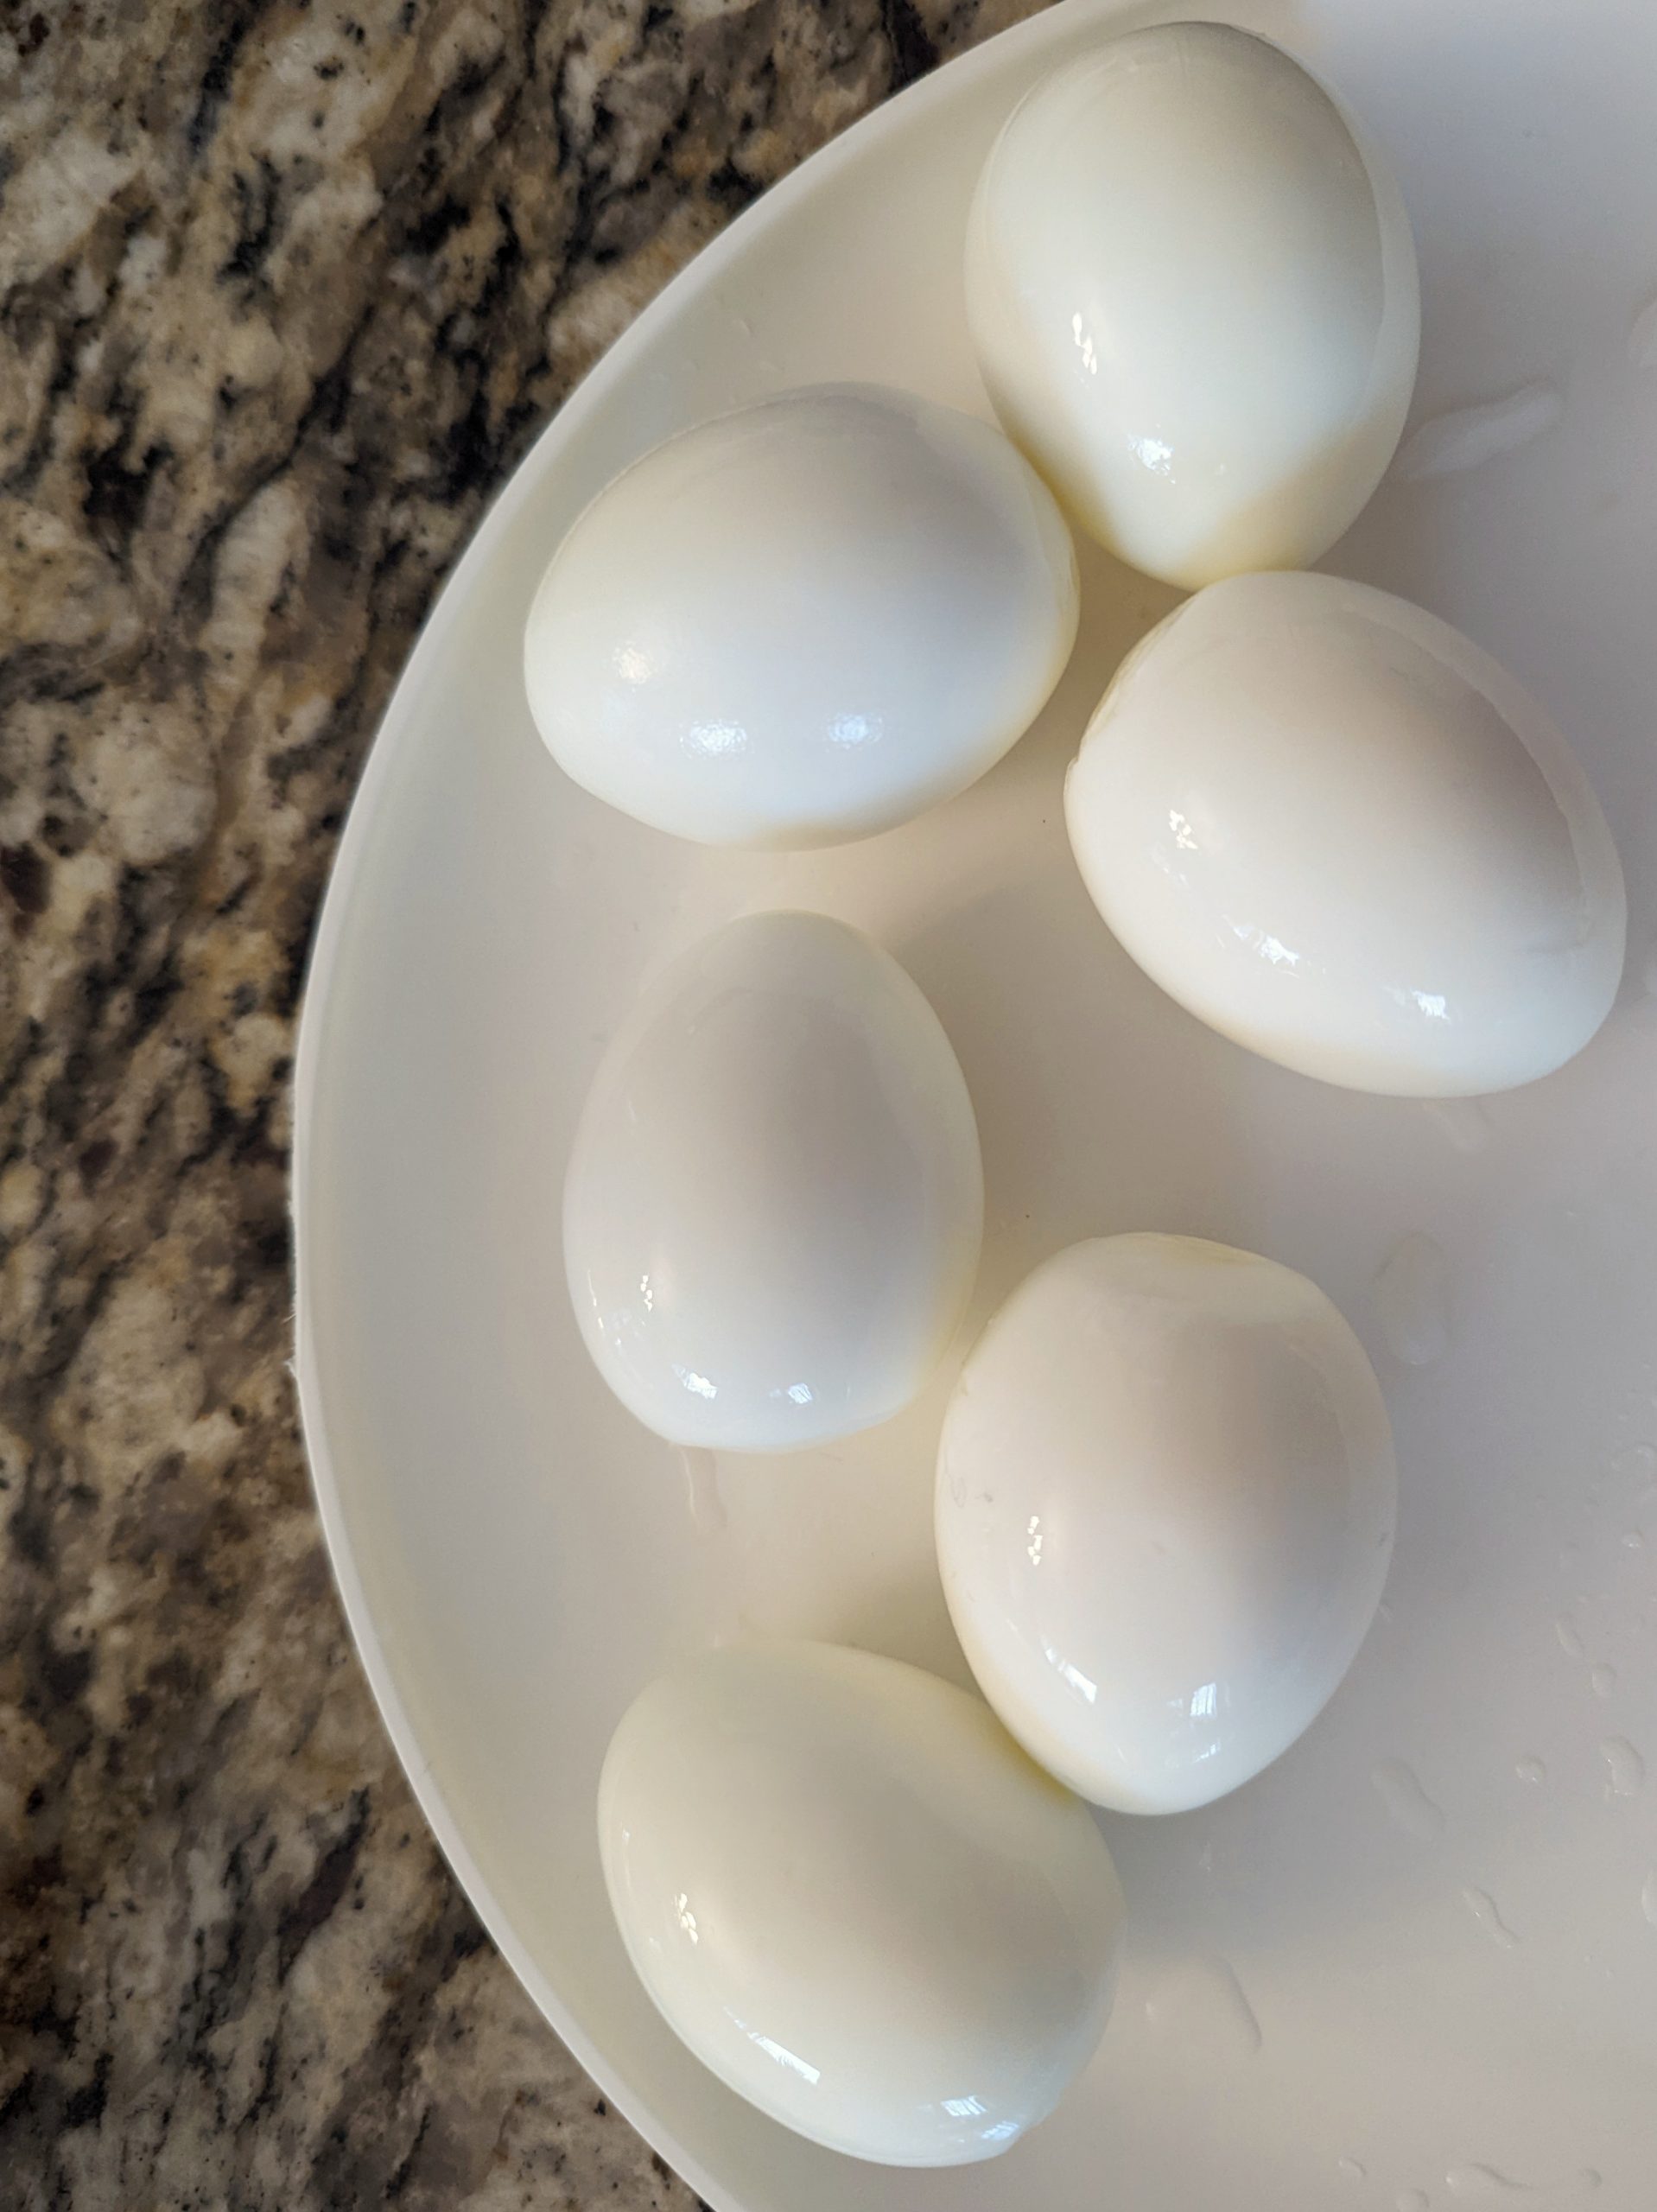 A plate of hard boiled eggs.